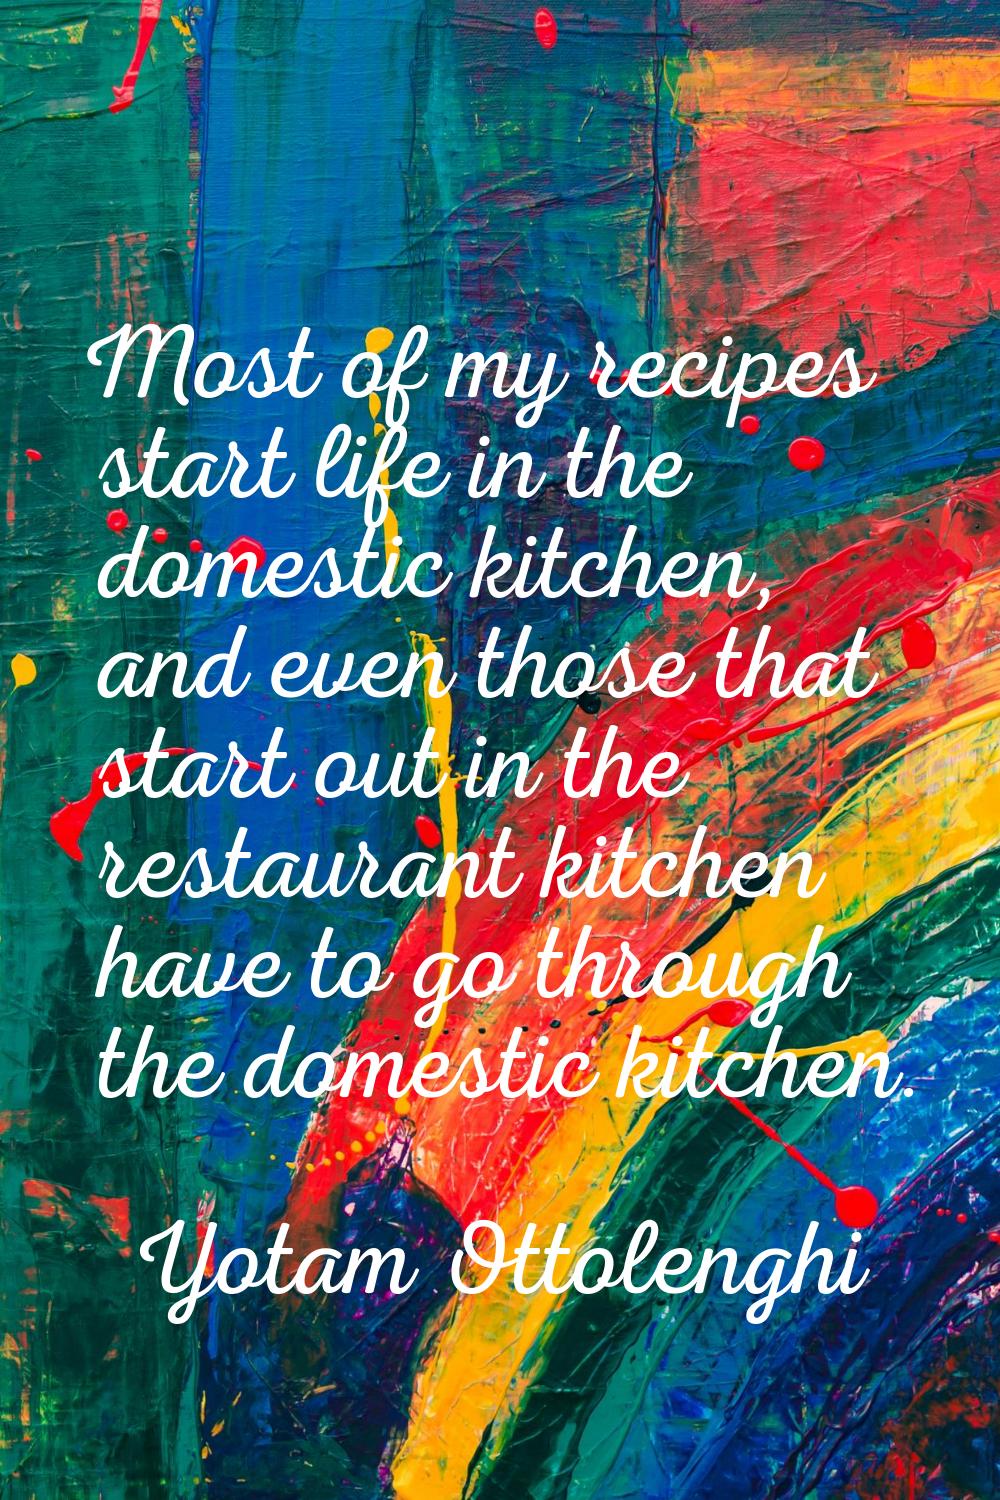 Most of my recipes start life in the domestic kitchen, and even those that start out in the restaur